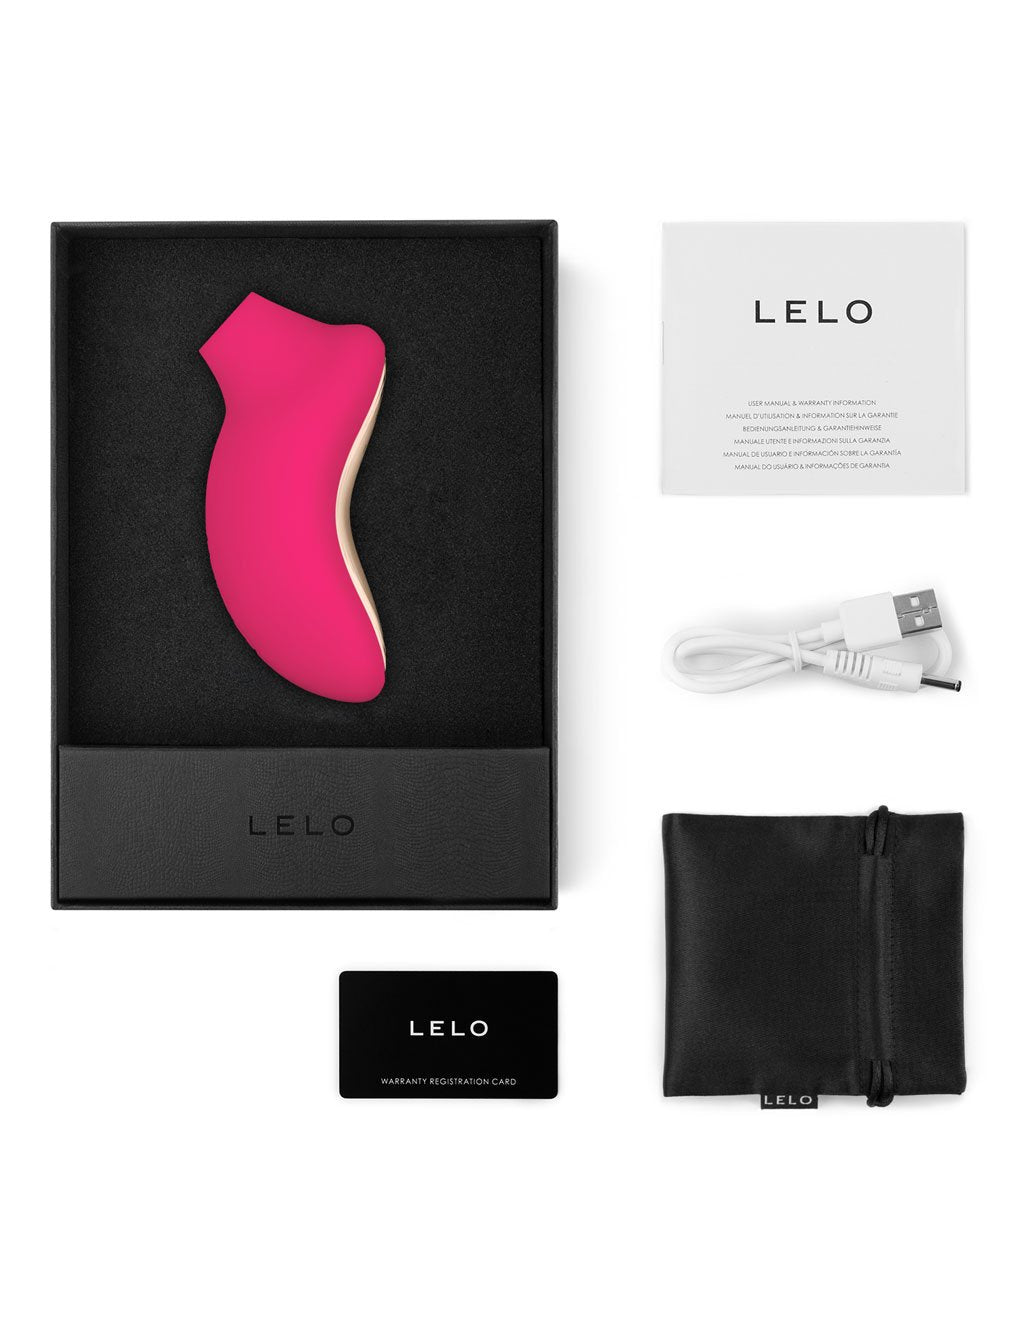 Lelo Sona Cruise 2 Sonic Clitoral Massager- Cerise- Contents